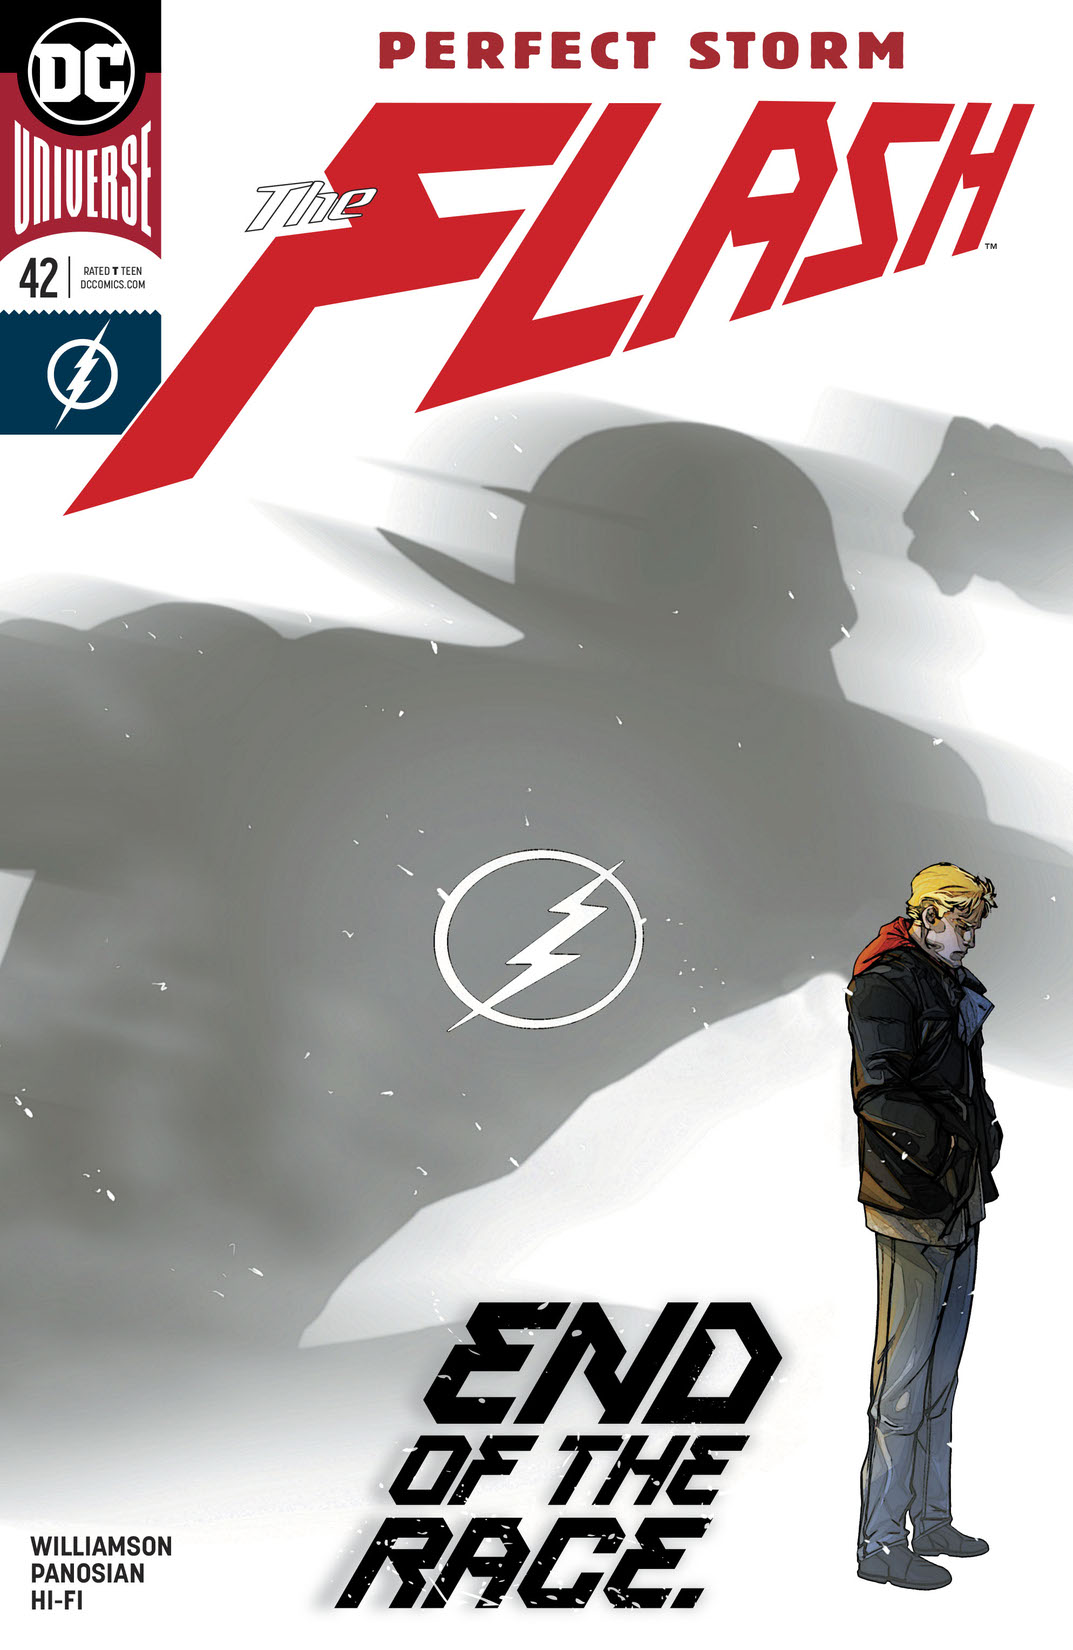 The Flash (2016-) #42 preview images